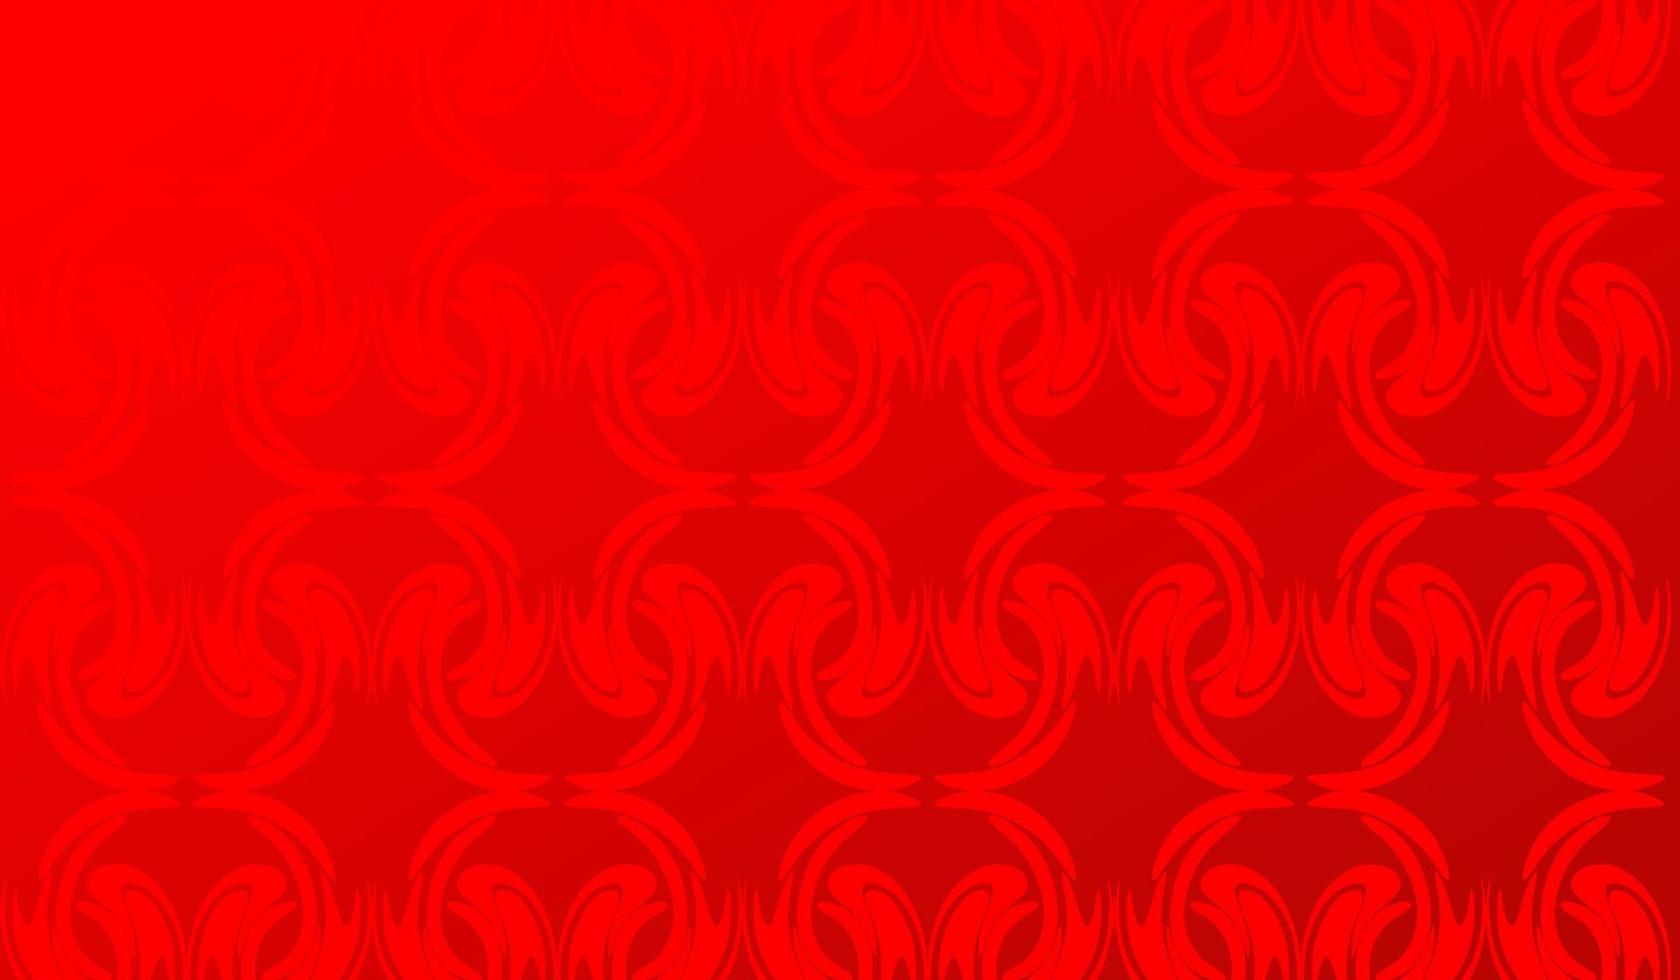 Colorful abstract background red flower blobs, cool and simple vector illustration